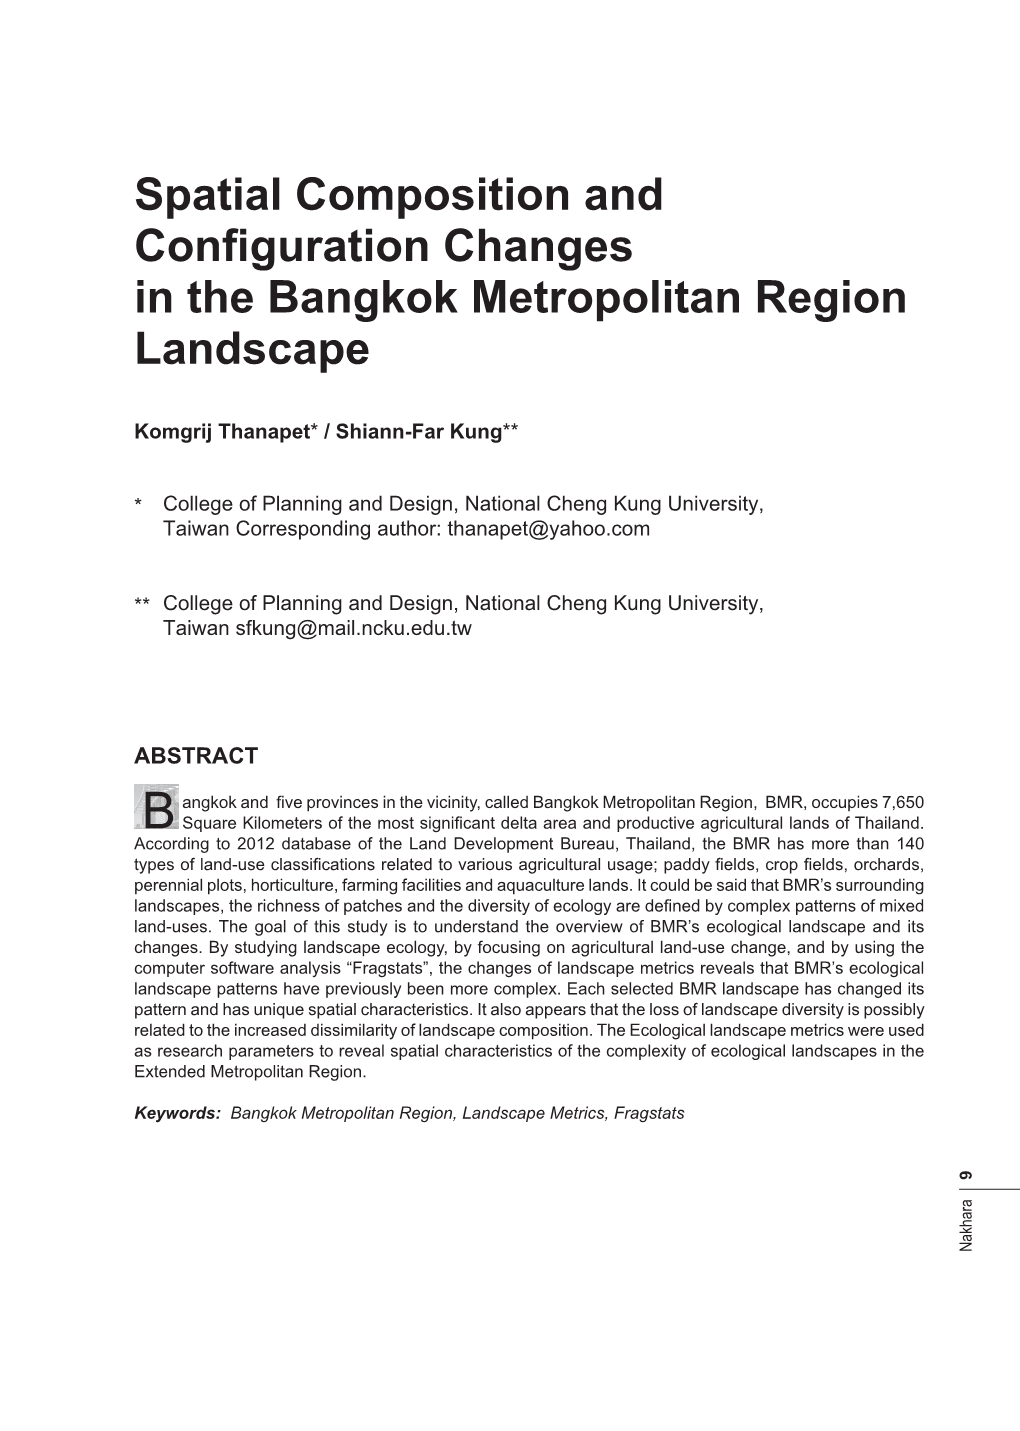 Spatial Composition and Configuration Changes in The